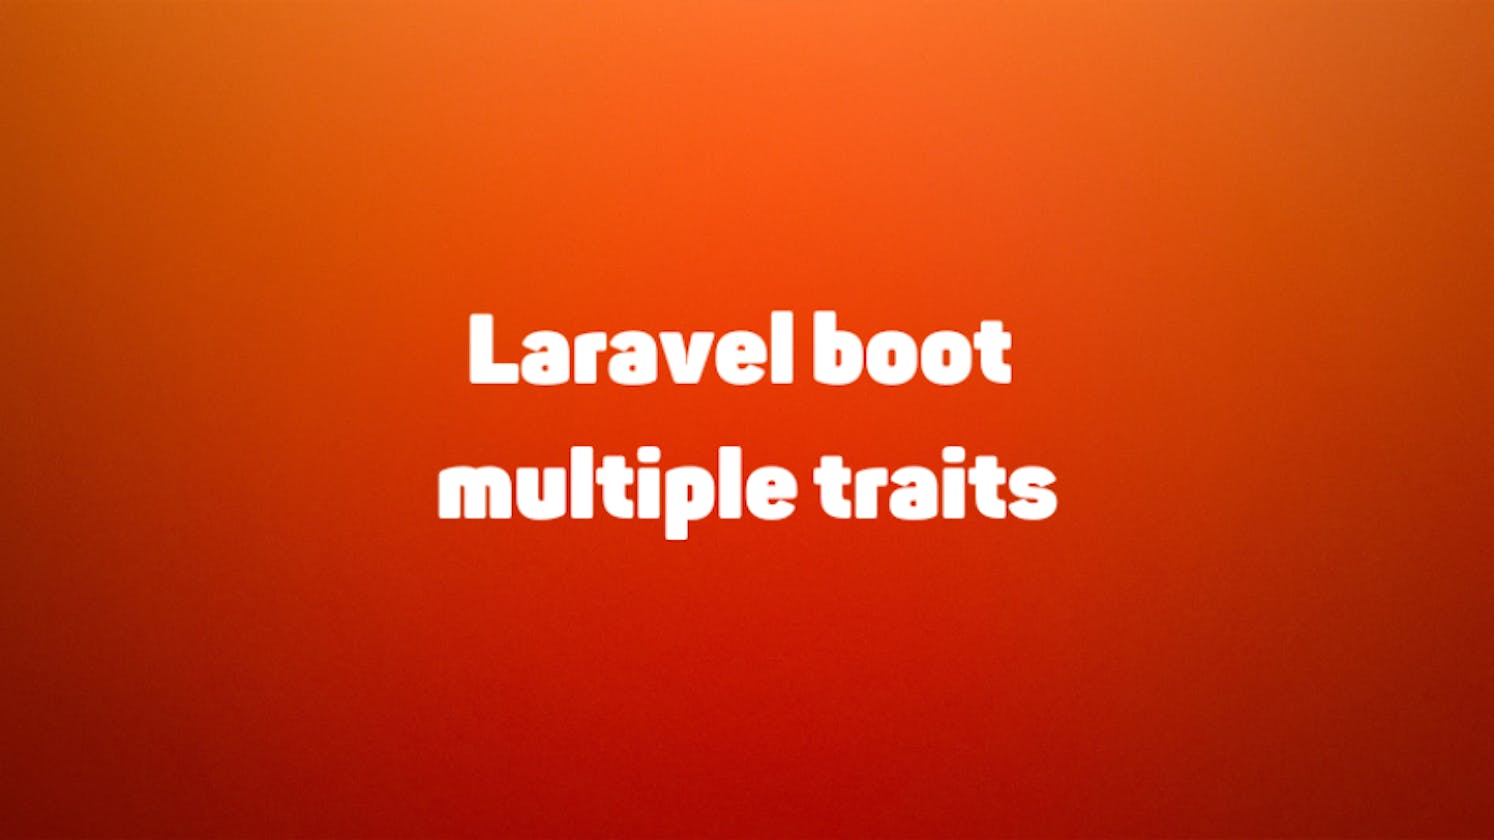 Laravel use multiple boot in traits